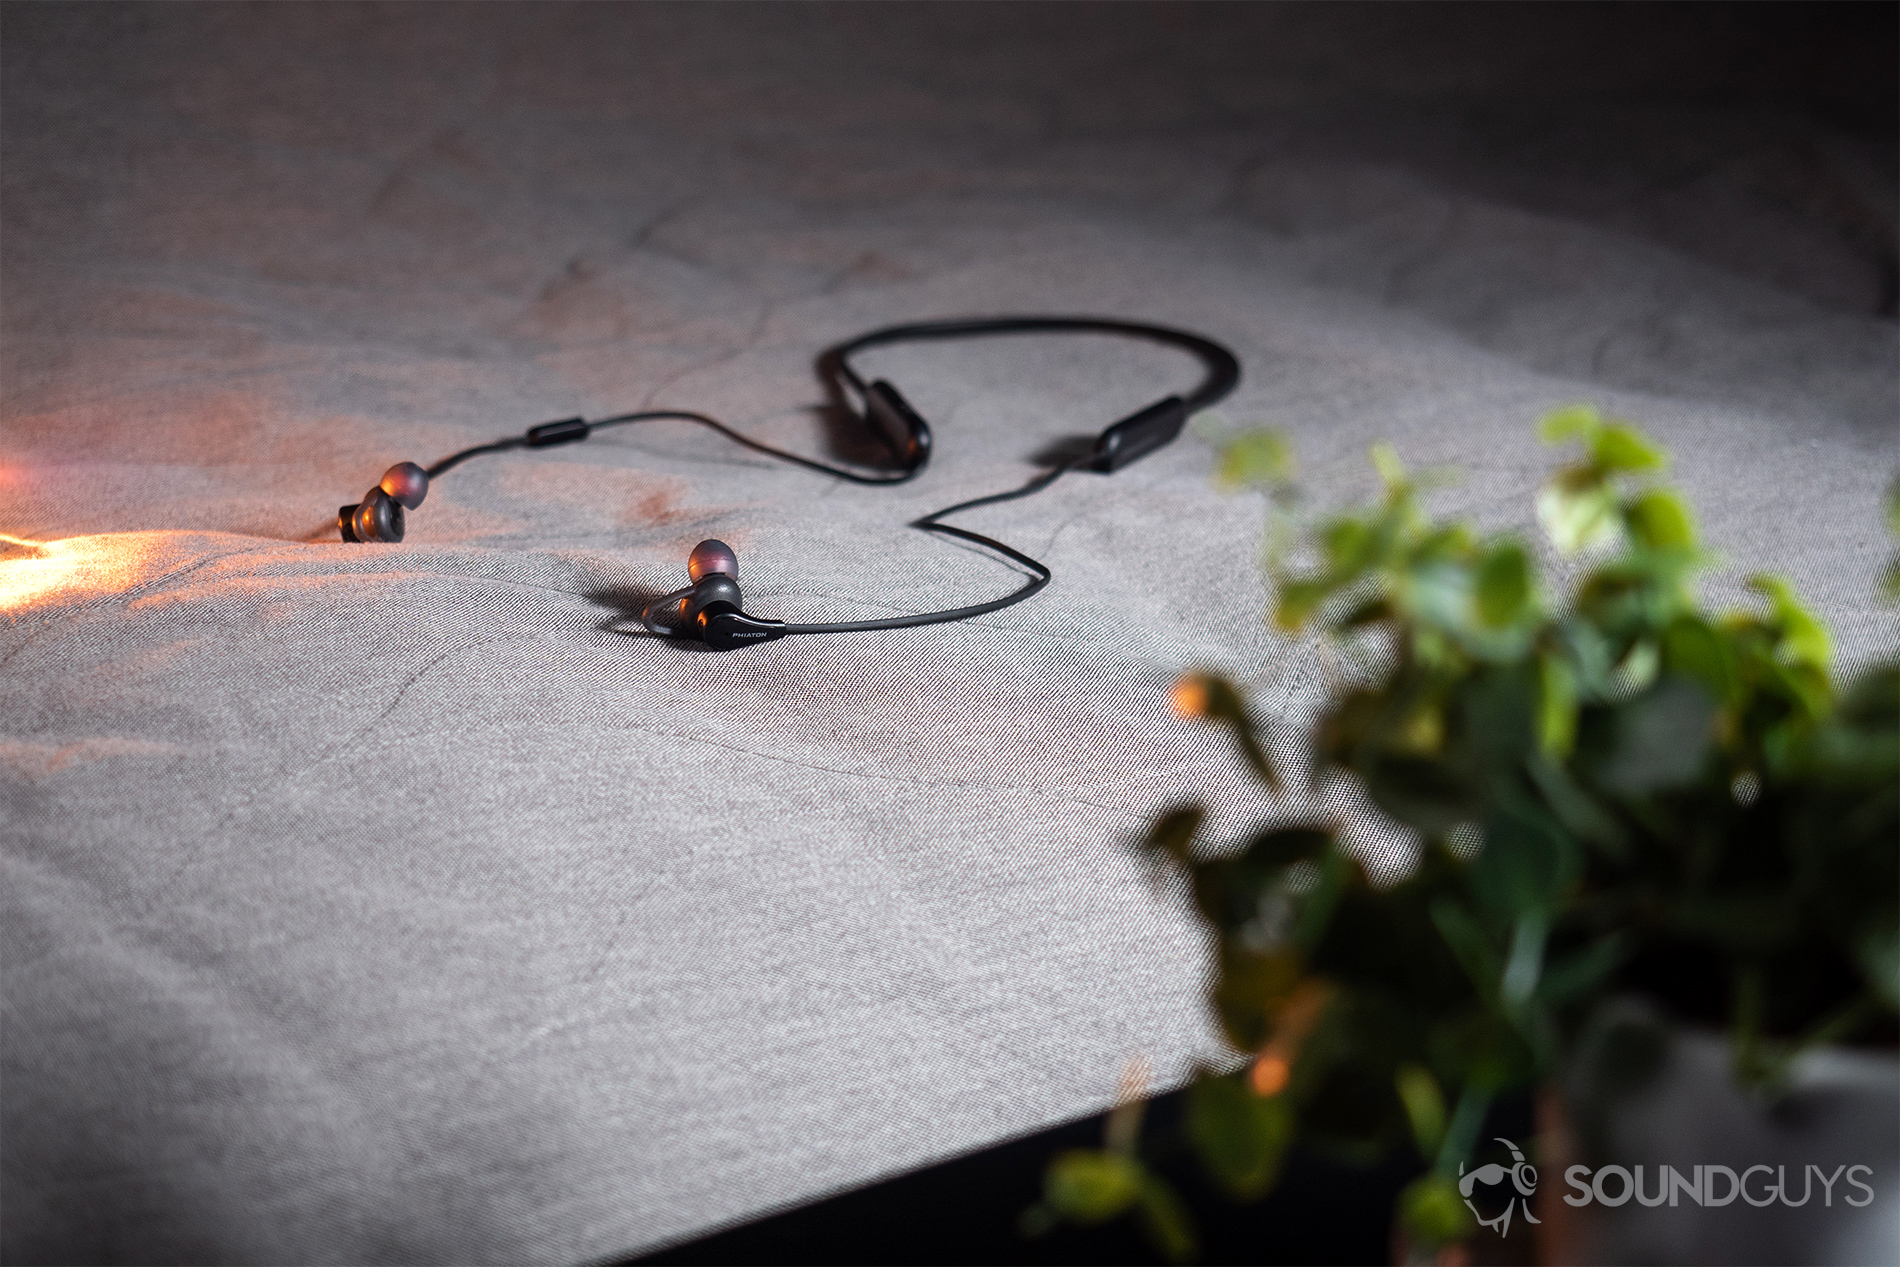 Phiaton Curve BT 120 NC: An image of the neckband earbuds laying on a grey cloth surface with light leaking in from the left vertical frame.